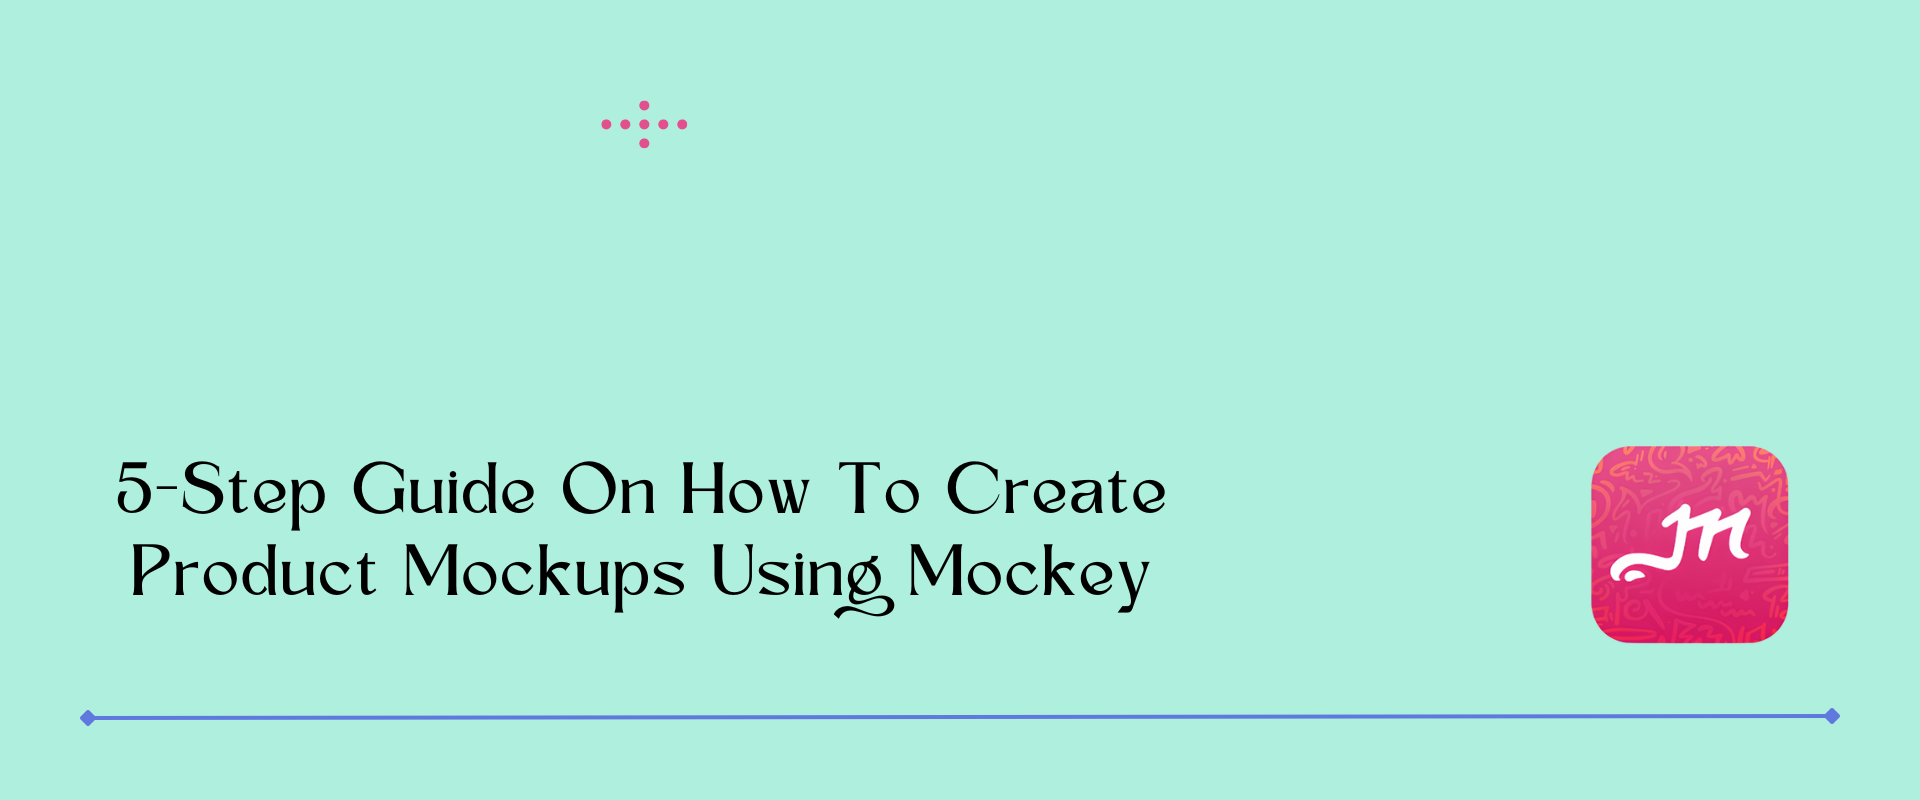 5-Step Guide On How To Create Product Mockups Using Mockey